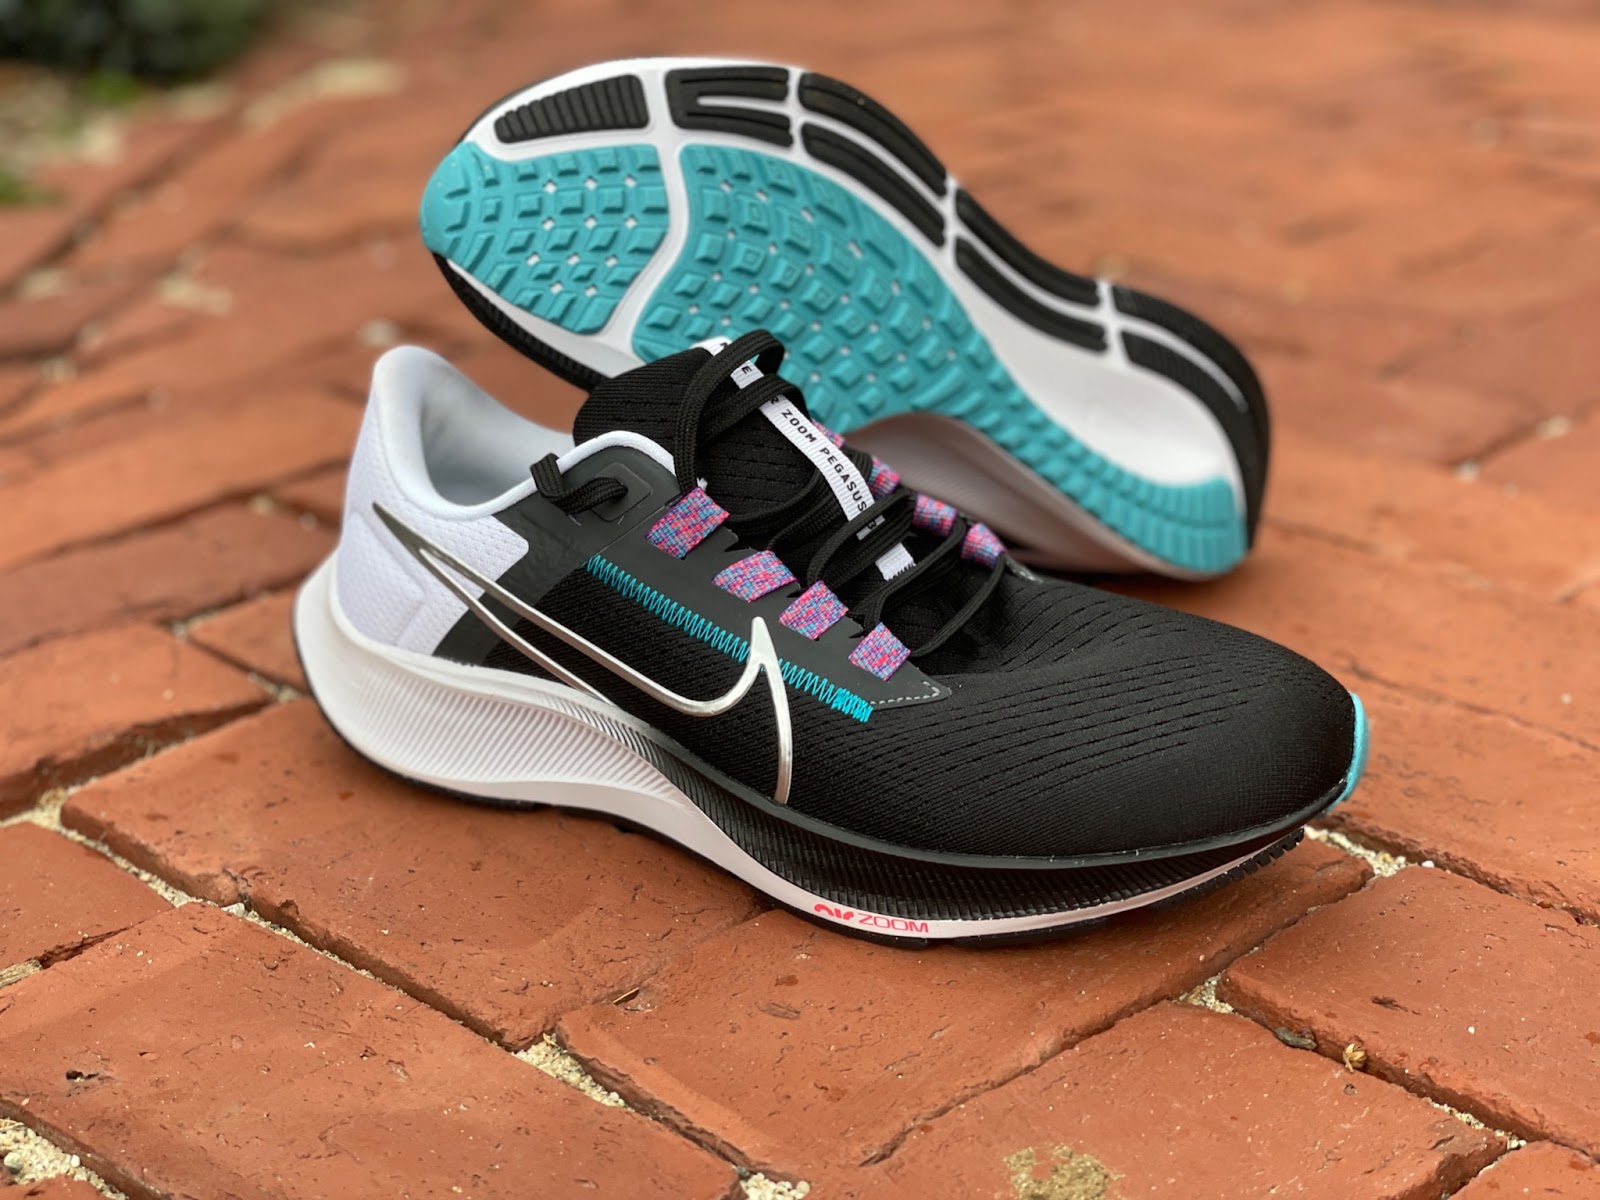 Road Trail Run: Nike 2021 Road Trainers Comparison Review: Zoom Pegasus 38,  ZoomX Invincible Run, and Zoom Tempo Next%